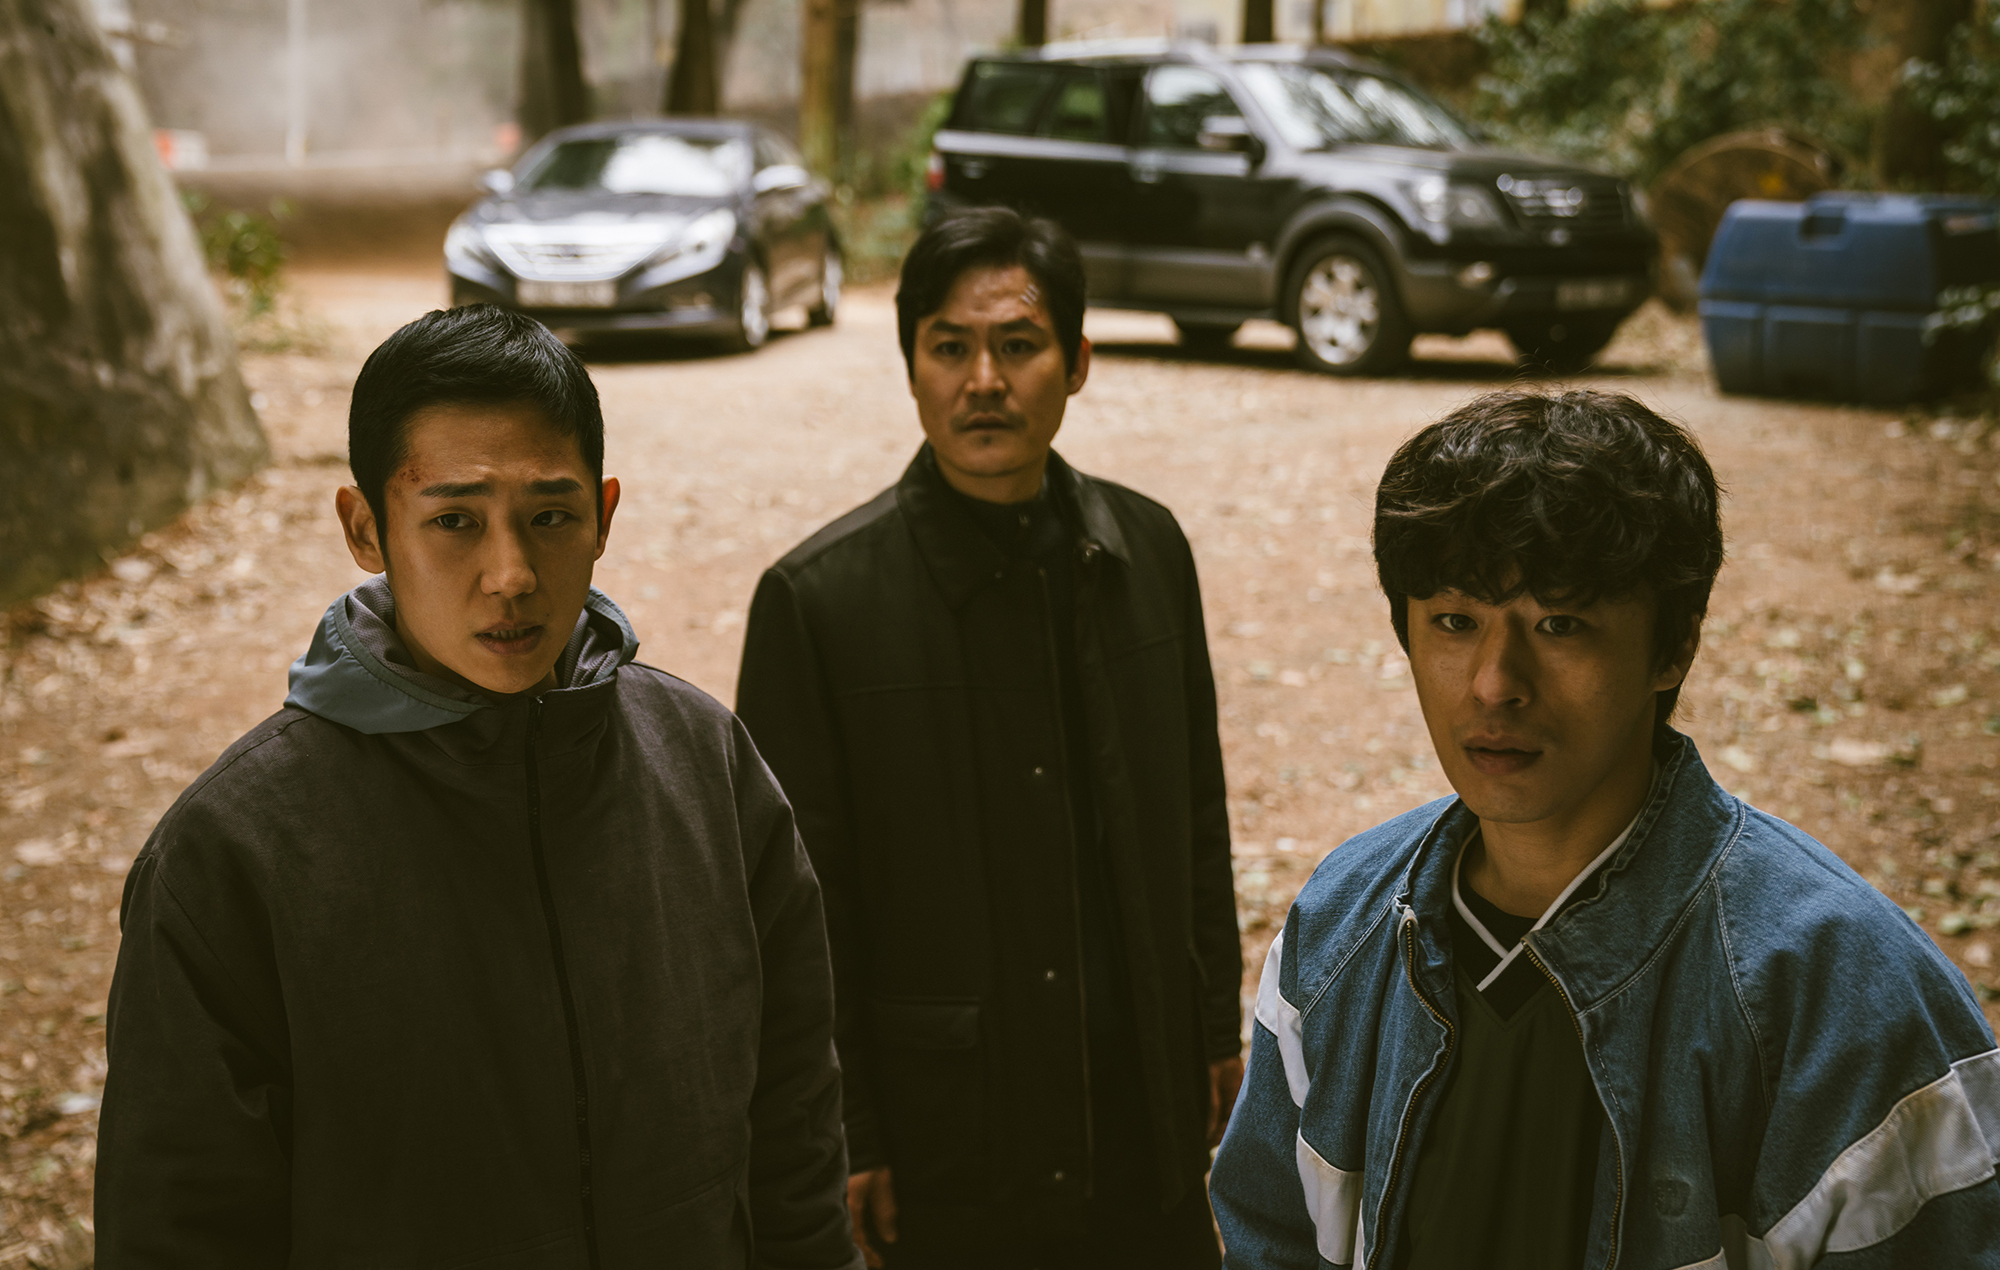 Jung Hae-In, Son Seok-Soo and Koo Kyo-Hwan 'D.P.' in civilian clothing as their characters